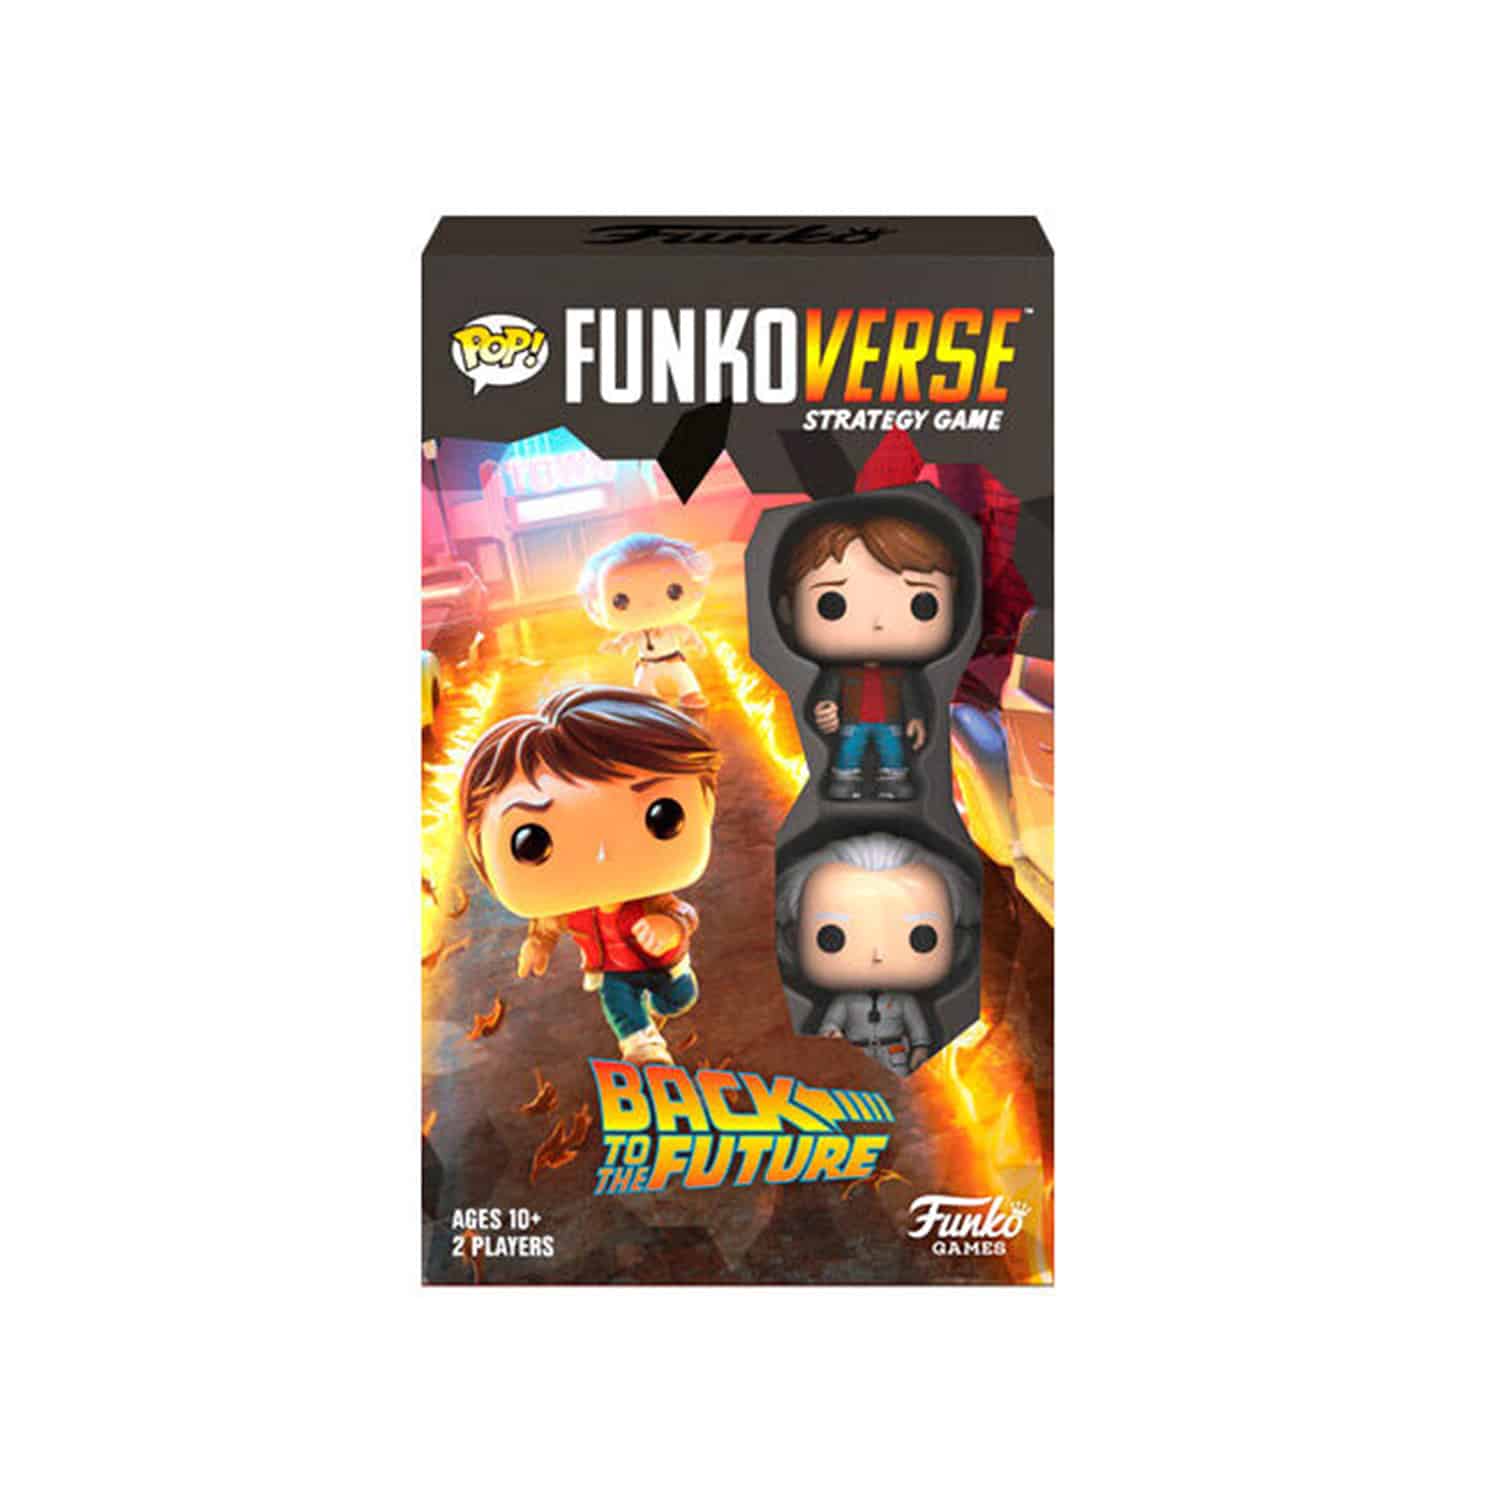 back-to-the-future-funkoverse-board-game